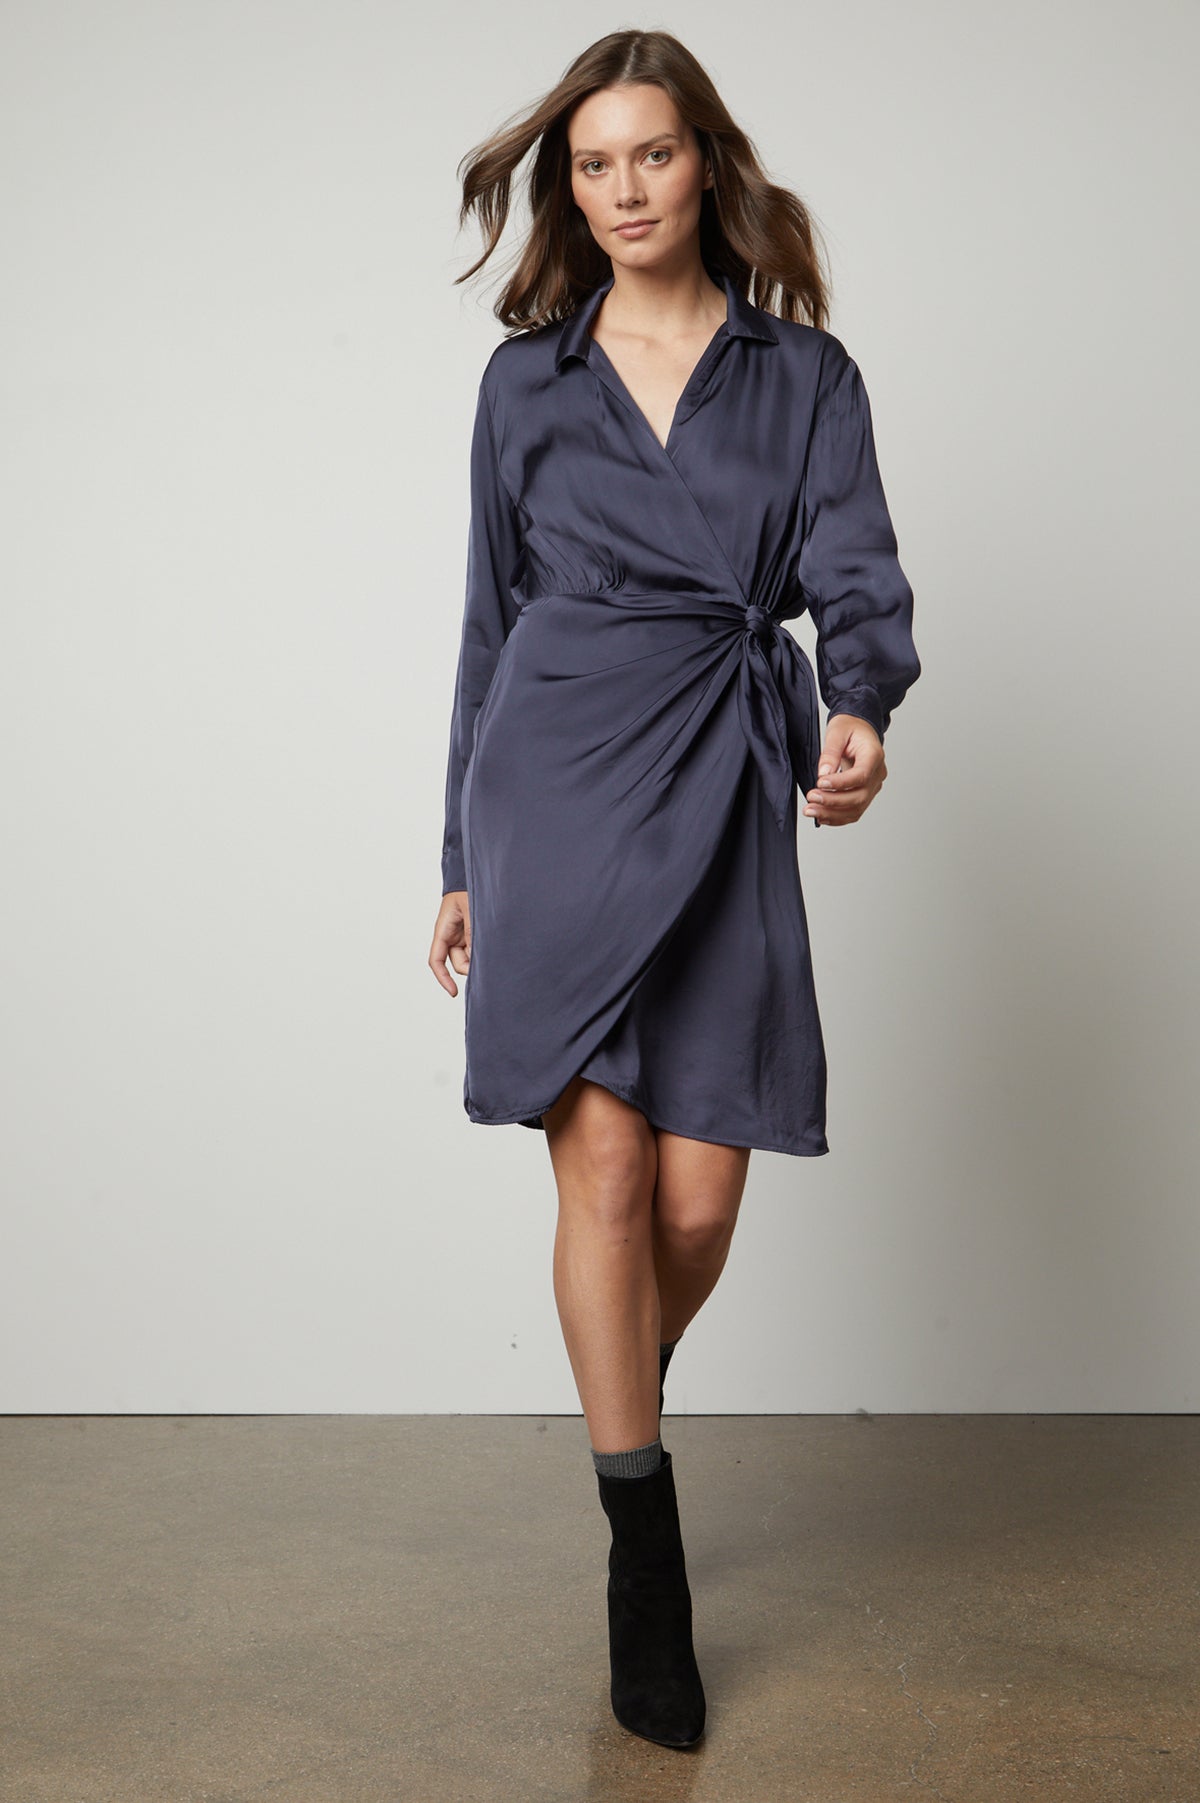 The model is wearing a Velvet by Graham & Spencer JUNI wrap dress with a satin viscose sheen.-35656155234497